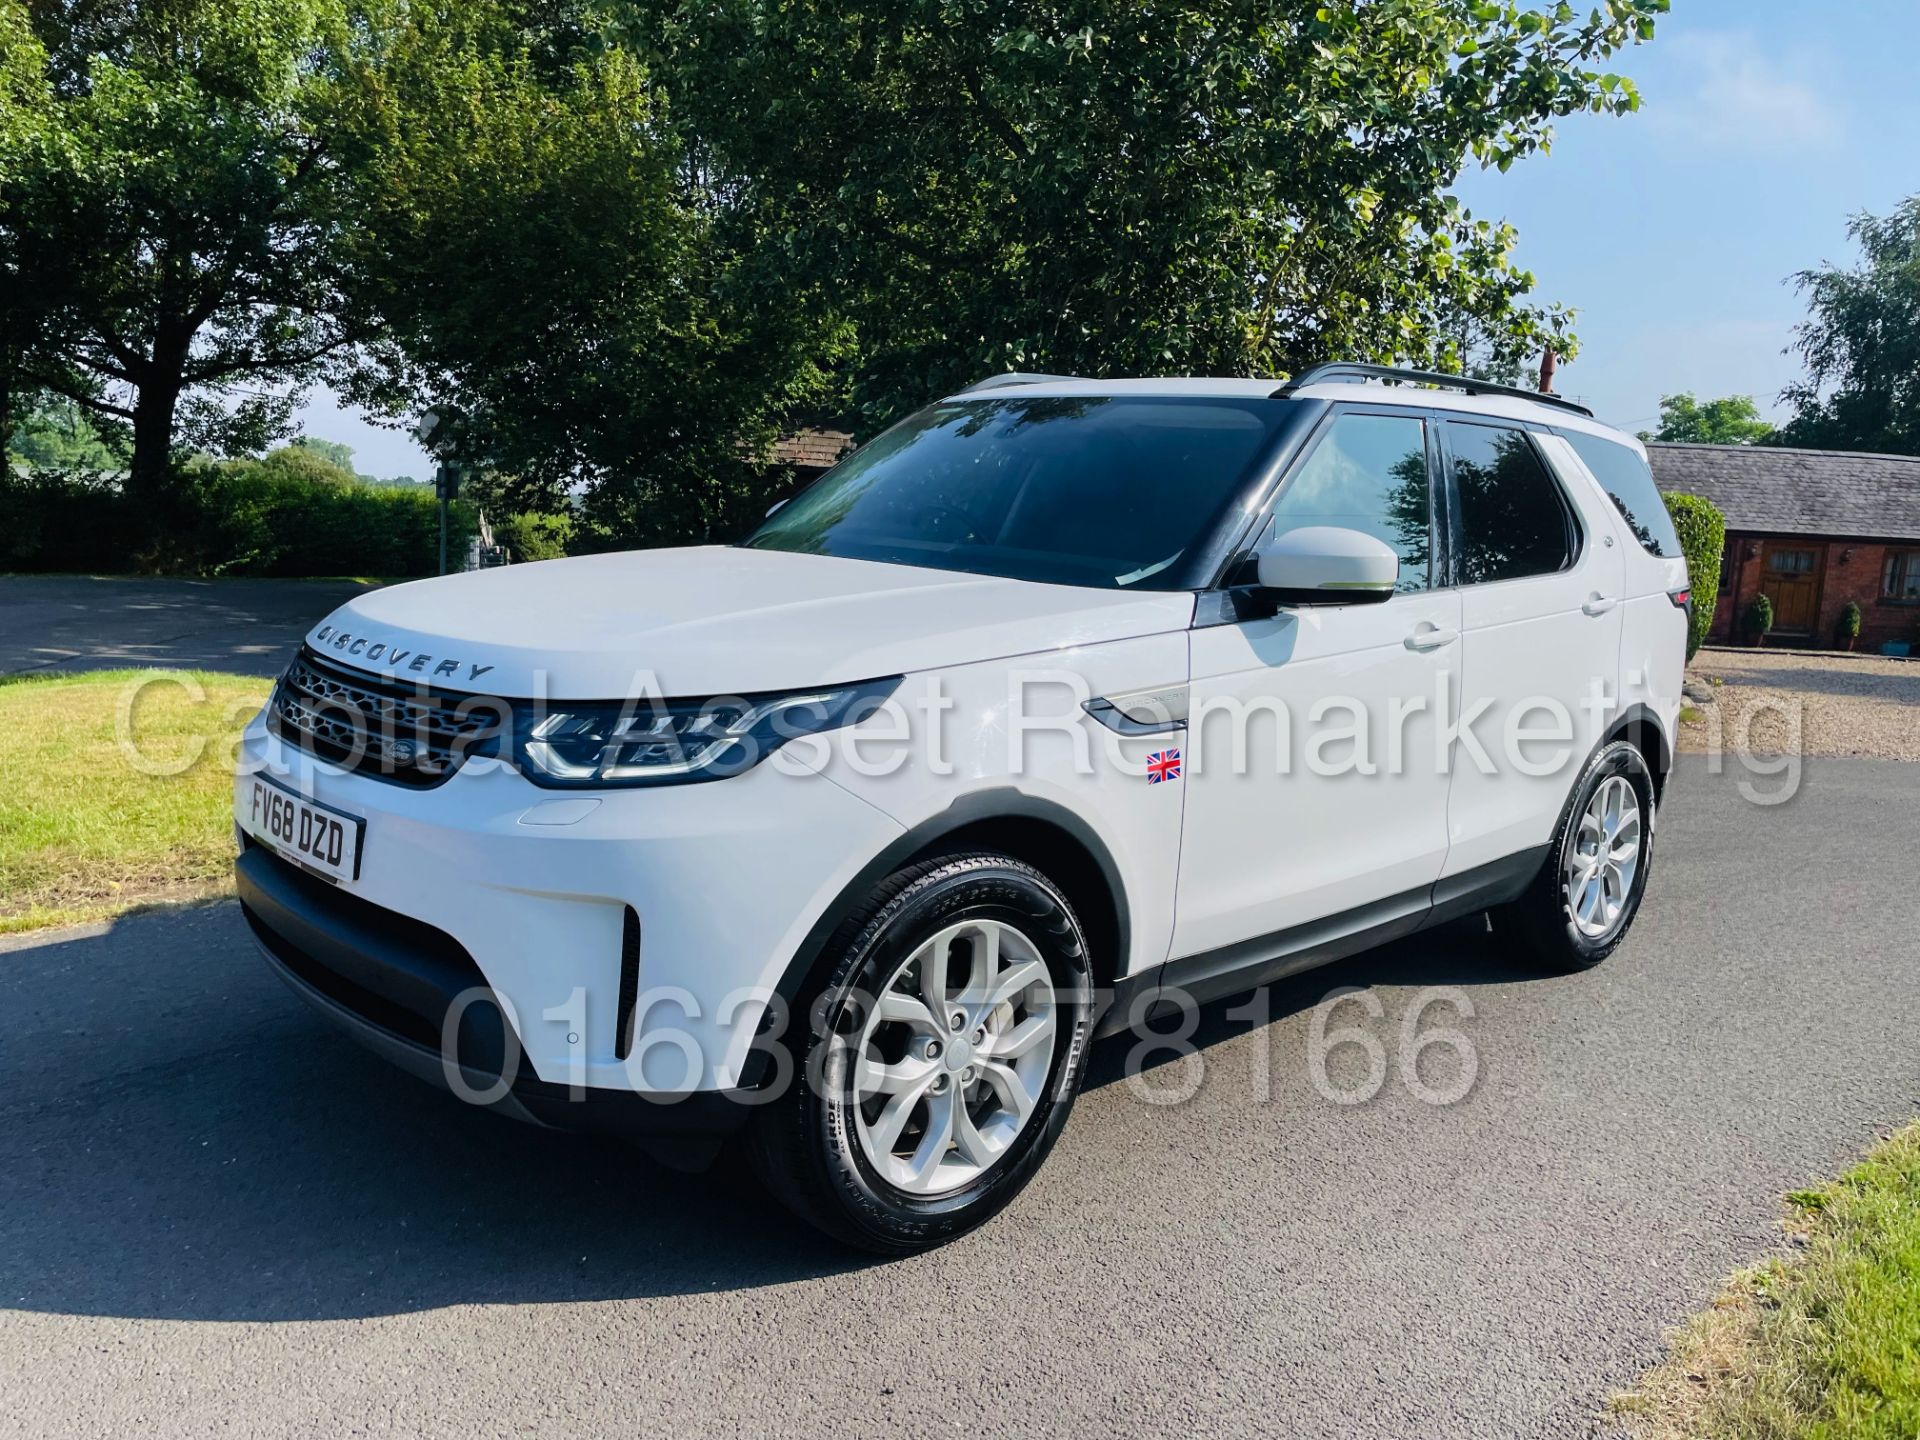 LAND ROVER DISCOVERY 5 *SE EDITION* SUV (2019 - EURO 6) '3.0 TD6 -306 BHP- 8 SPEED AUTO' *HUGE SPEC* - Image 6 of 47